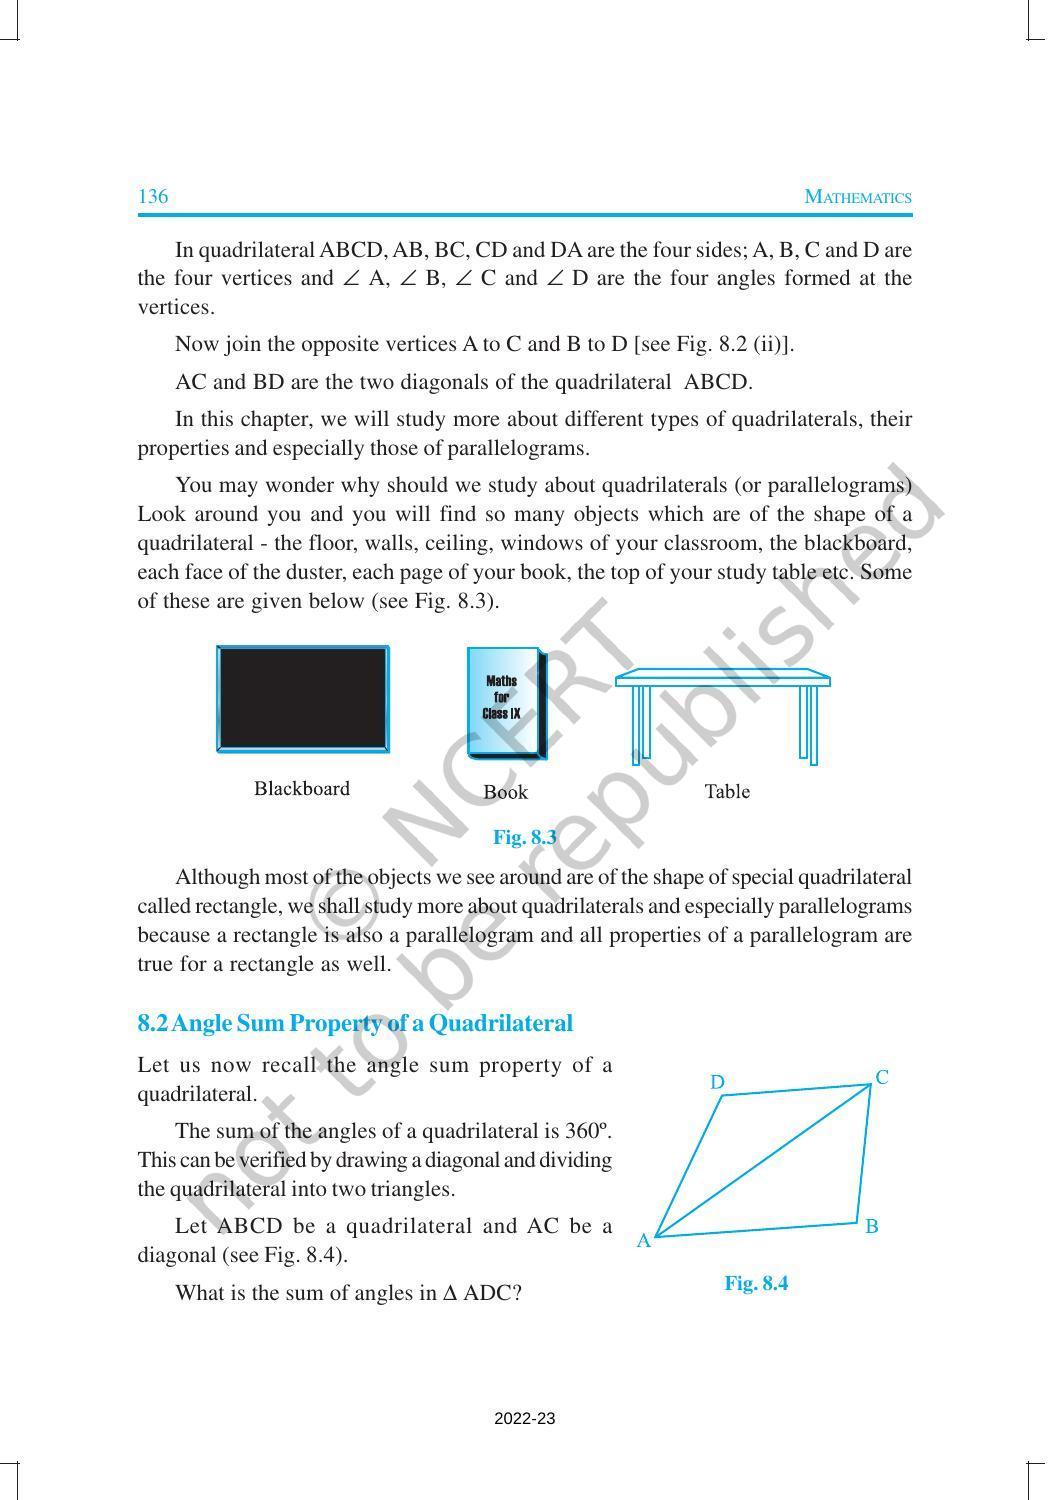 NCERT Book for Class 9 Maths Chapter 8 Quadrilaterals - Page 2